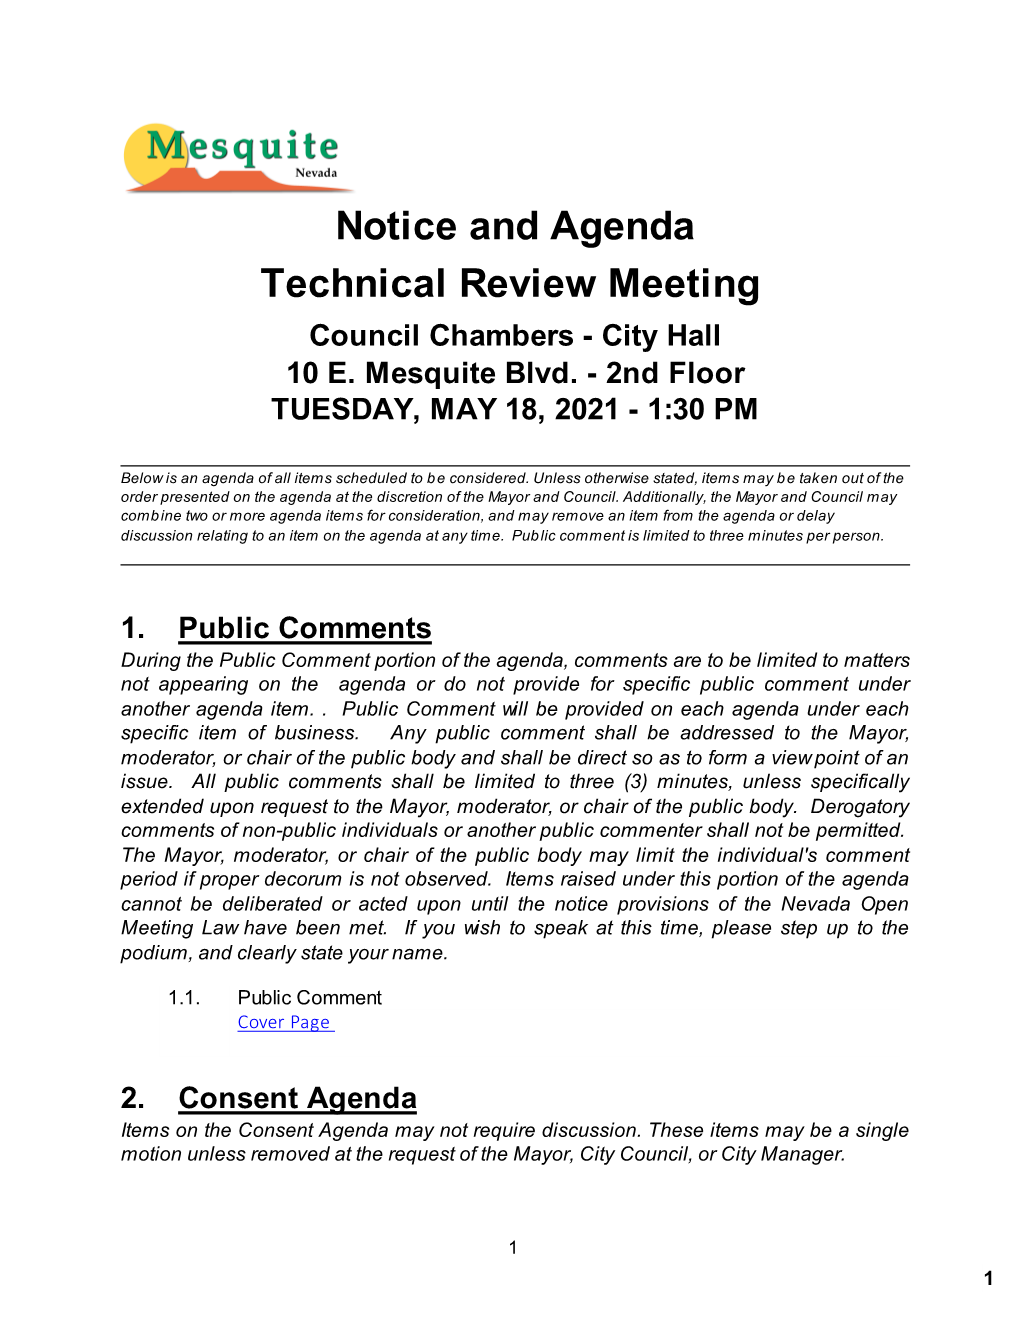 Notice and Agenda Technical Review Meeting Council Chambers - City Hall 10 E